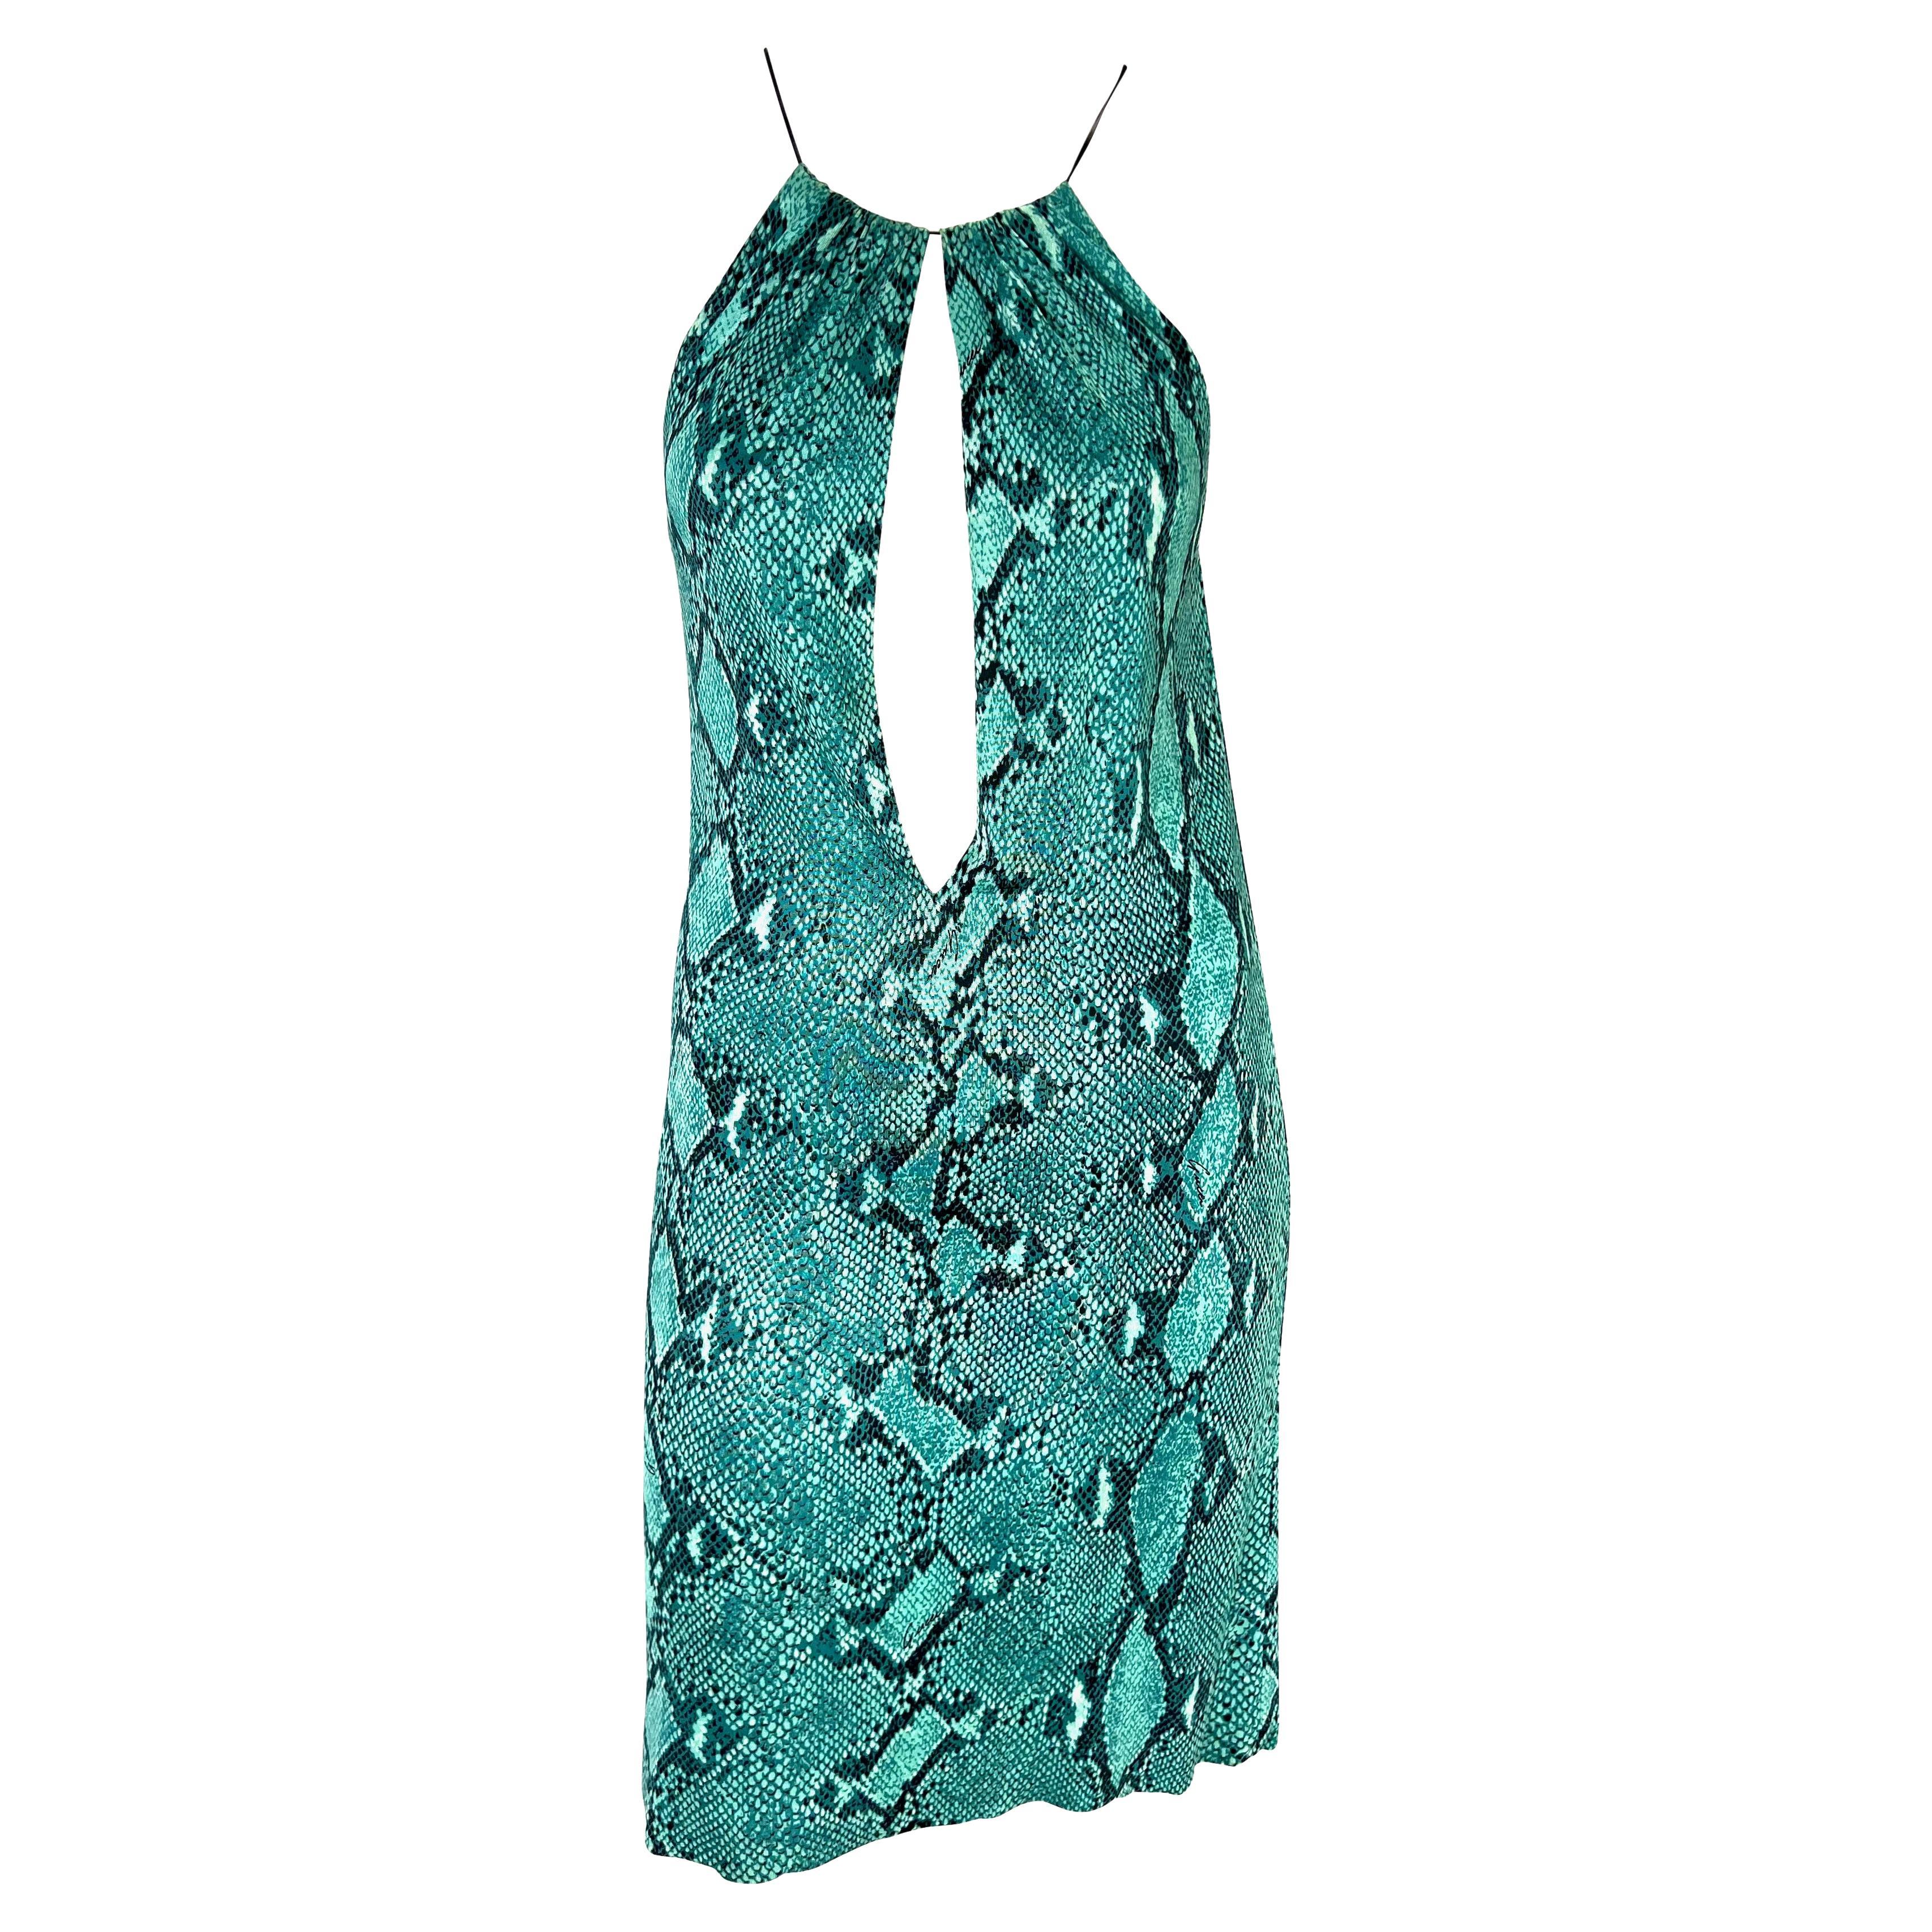 S/S 2000 Gucci by Tom Ford Blue Snake Print Viscose Leather Strap Plunging Dress